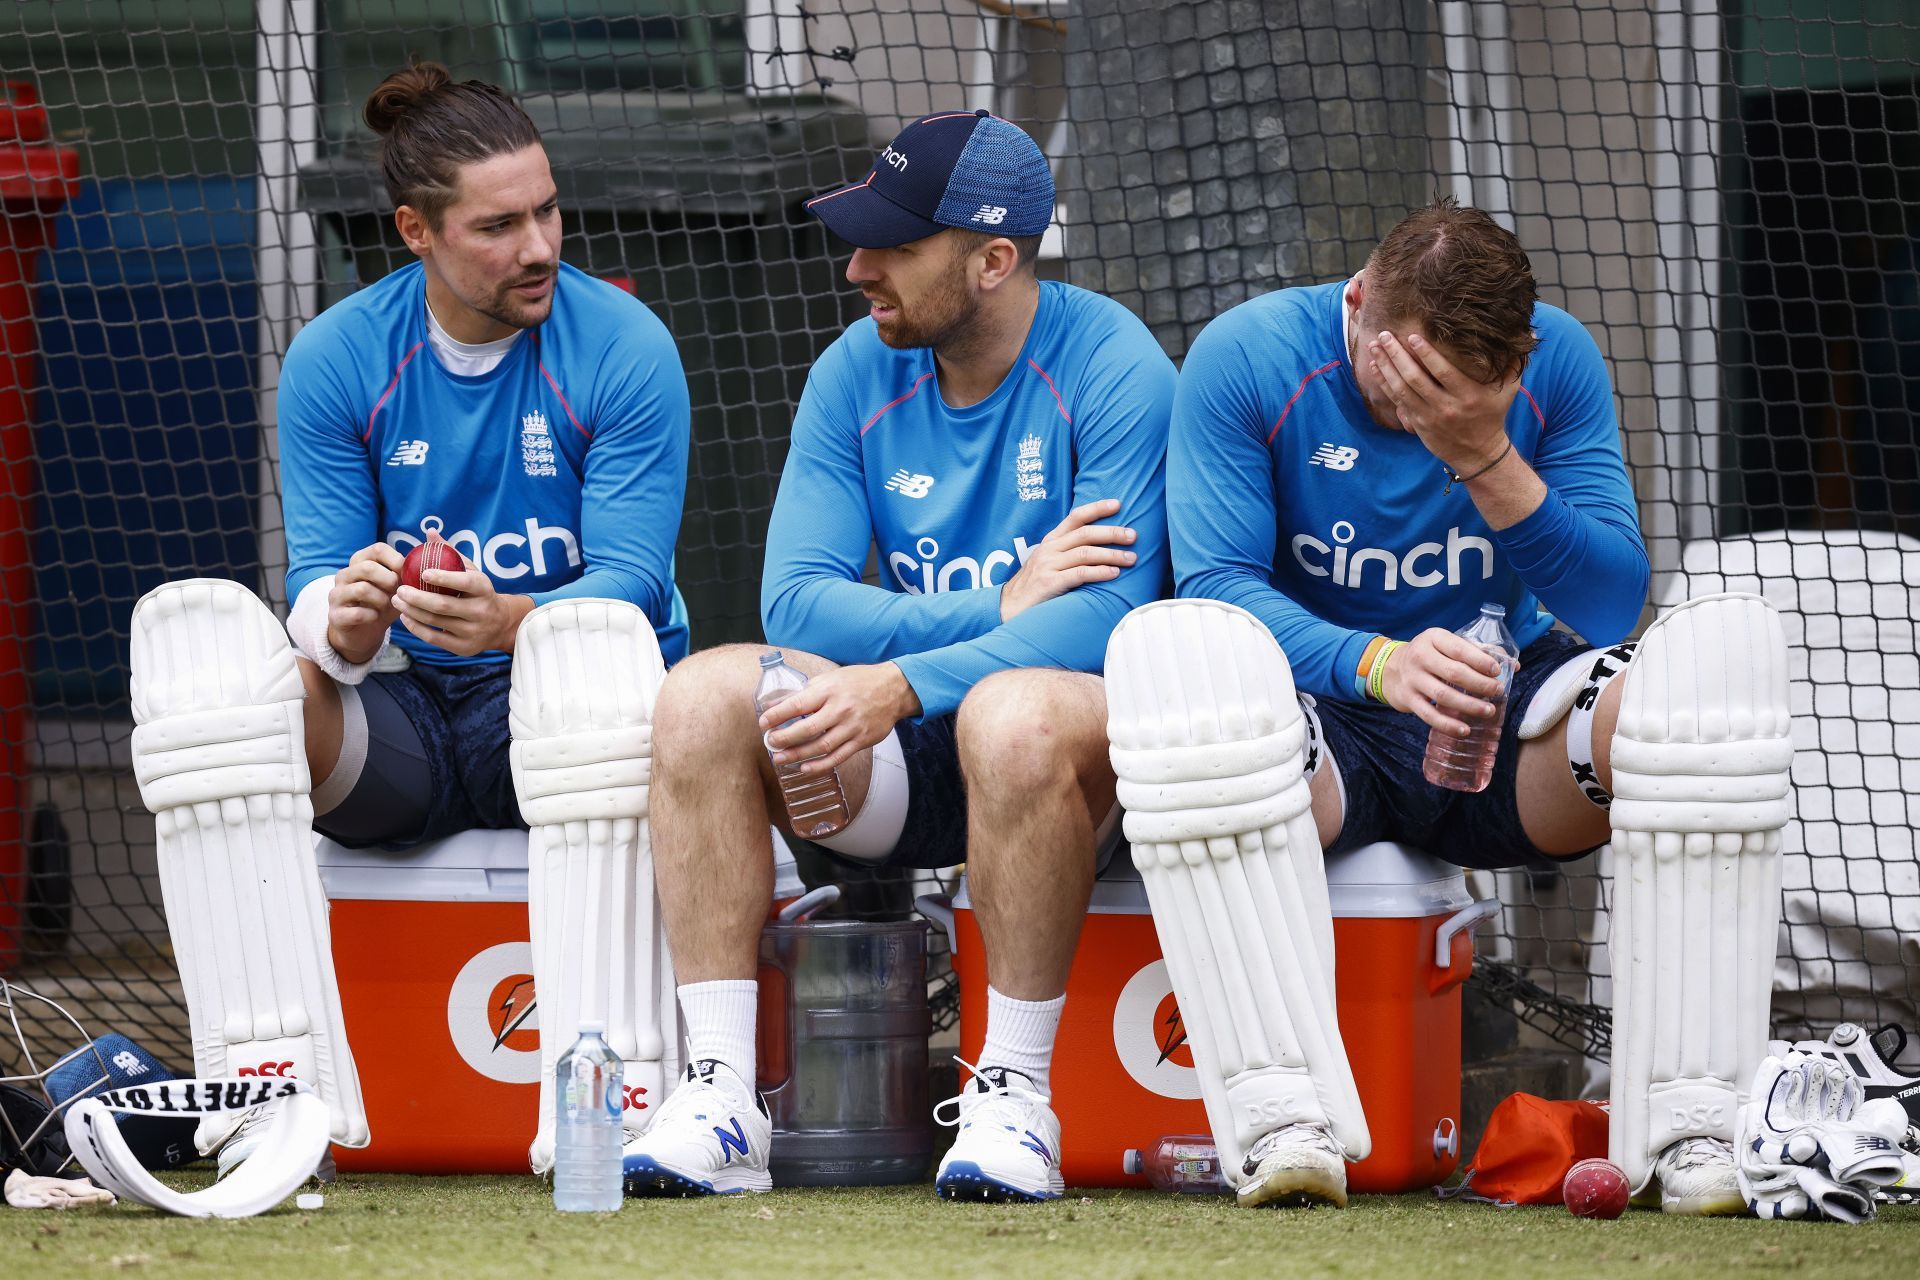 Rory Burns (left) is among the players who have been short of runs on the ongoing Ashes tour.